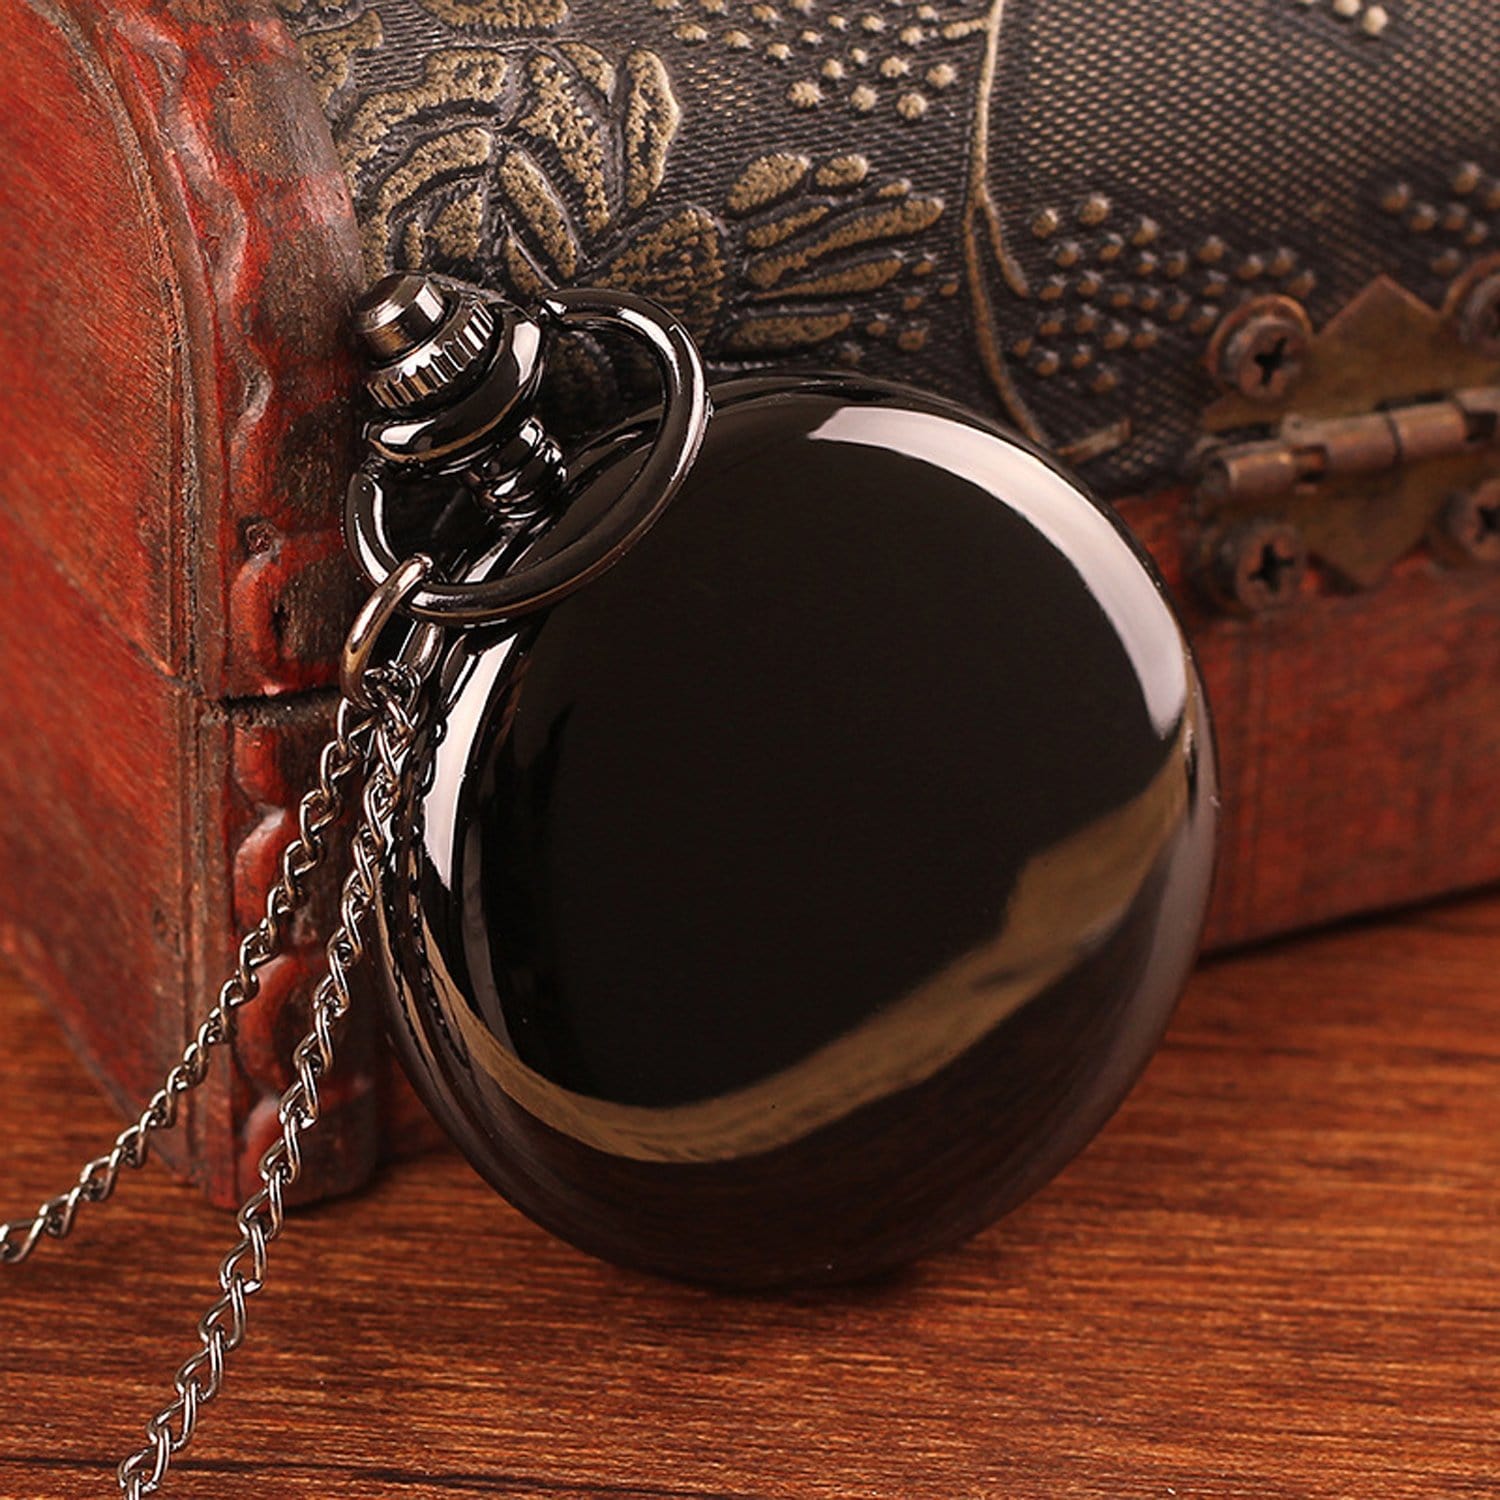 Pocket Watches To My Man - I Love You Pocket Watch GiveMe-Gifts